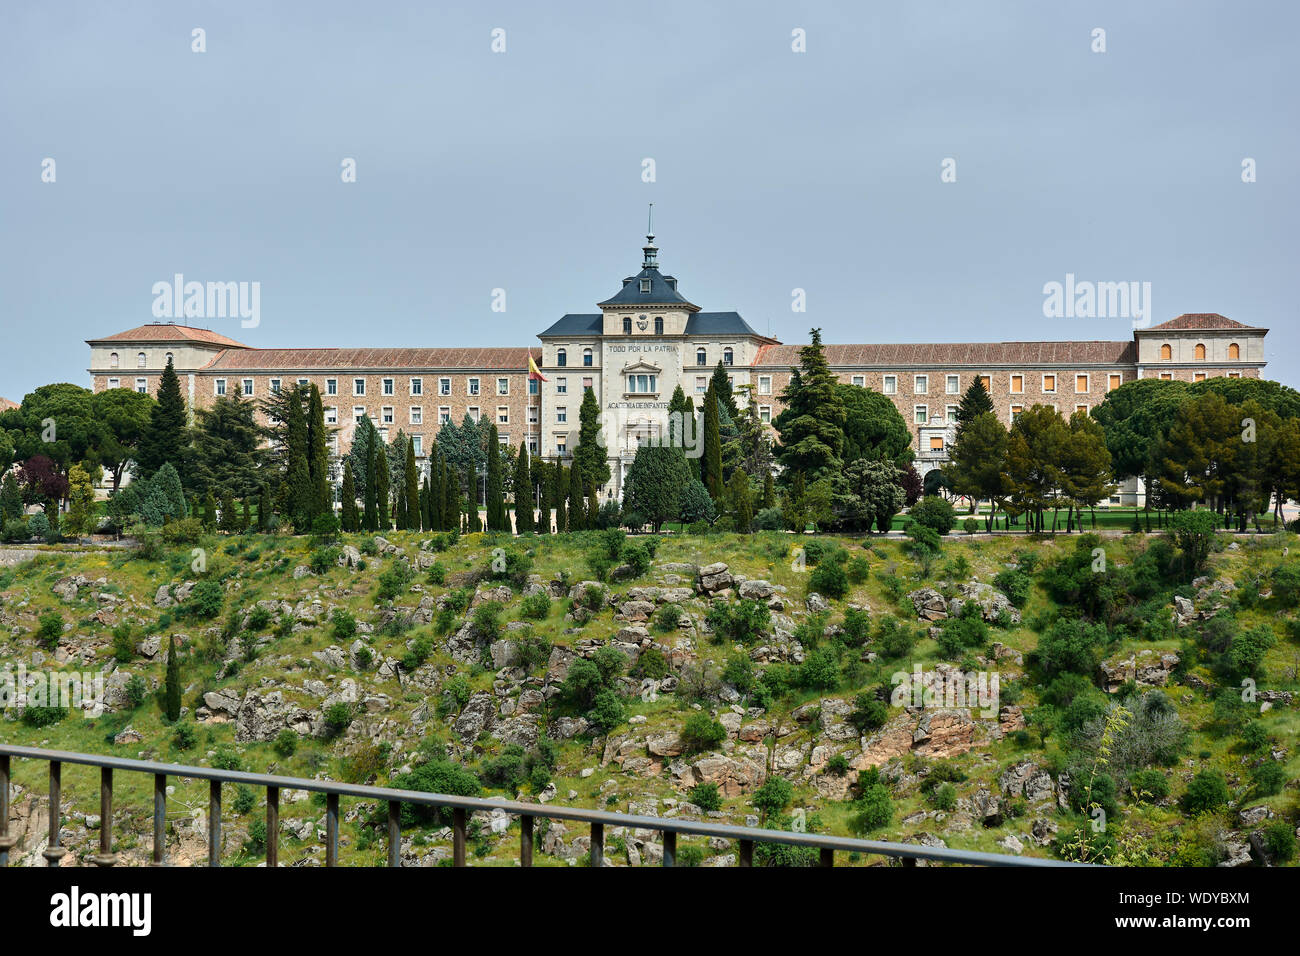 TOLEDO, SPAIN - APRIL 24, 2018: View of the Infantry Academy of Toledo, near the historic city center. Stock Photo